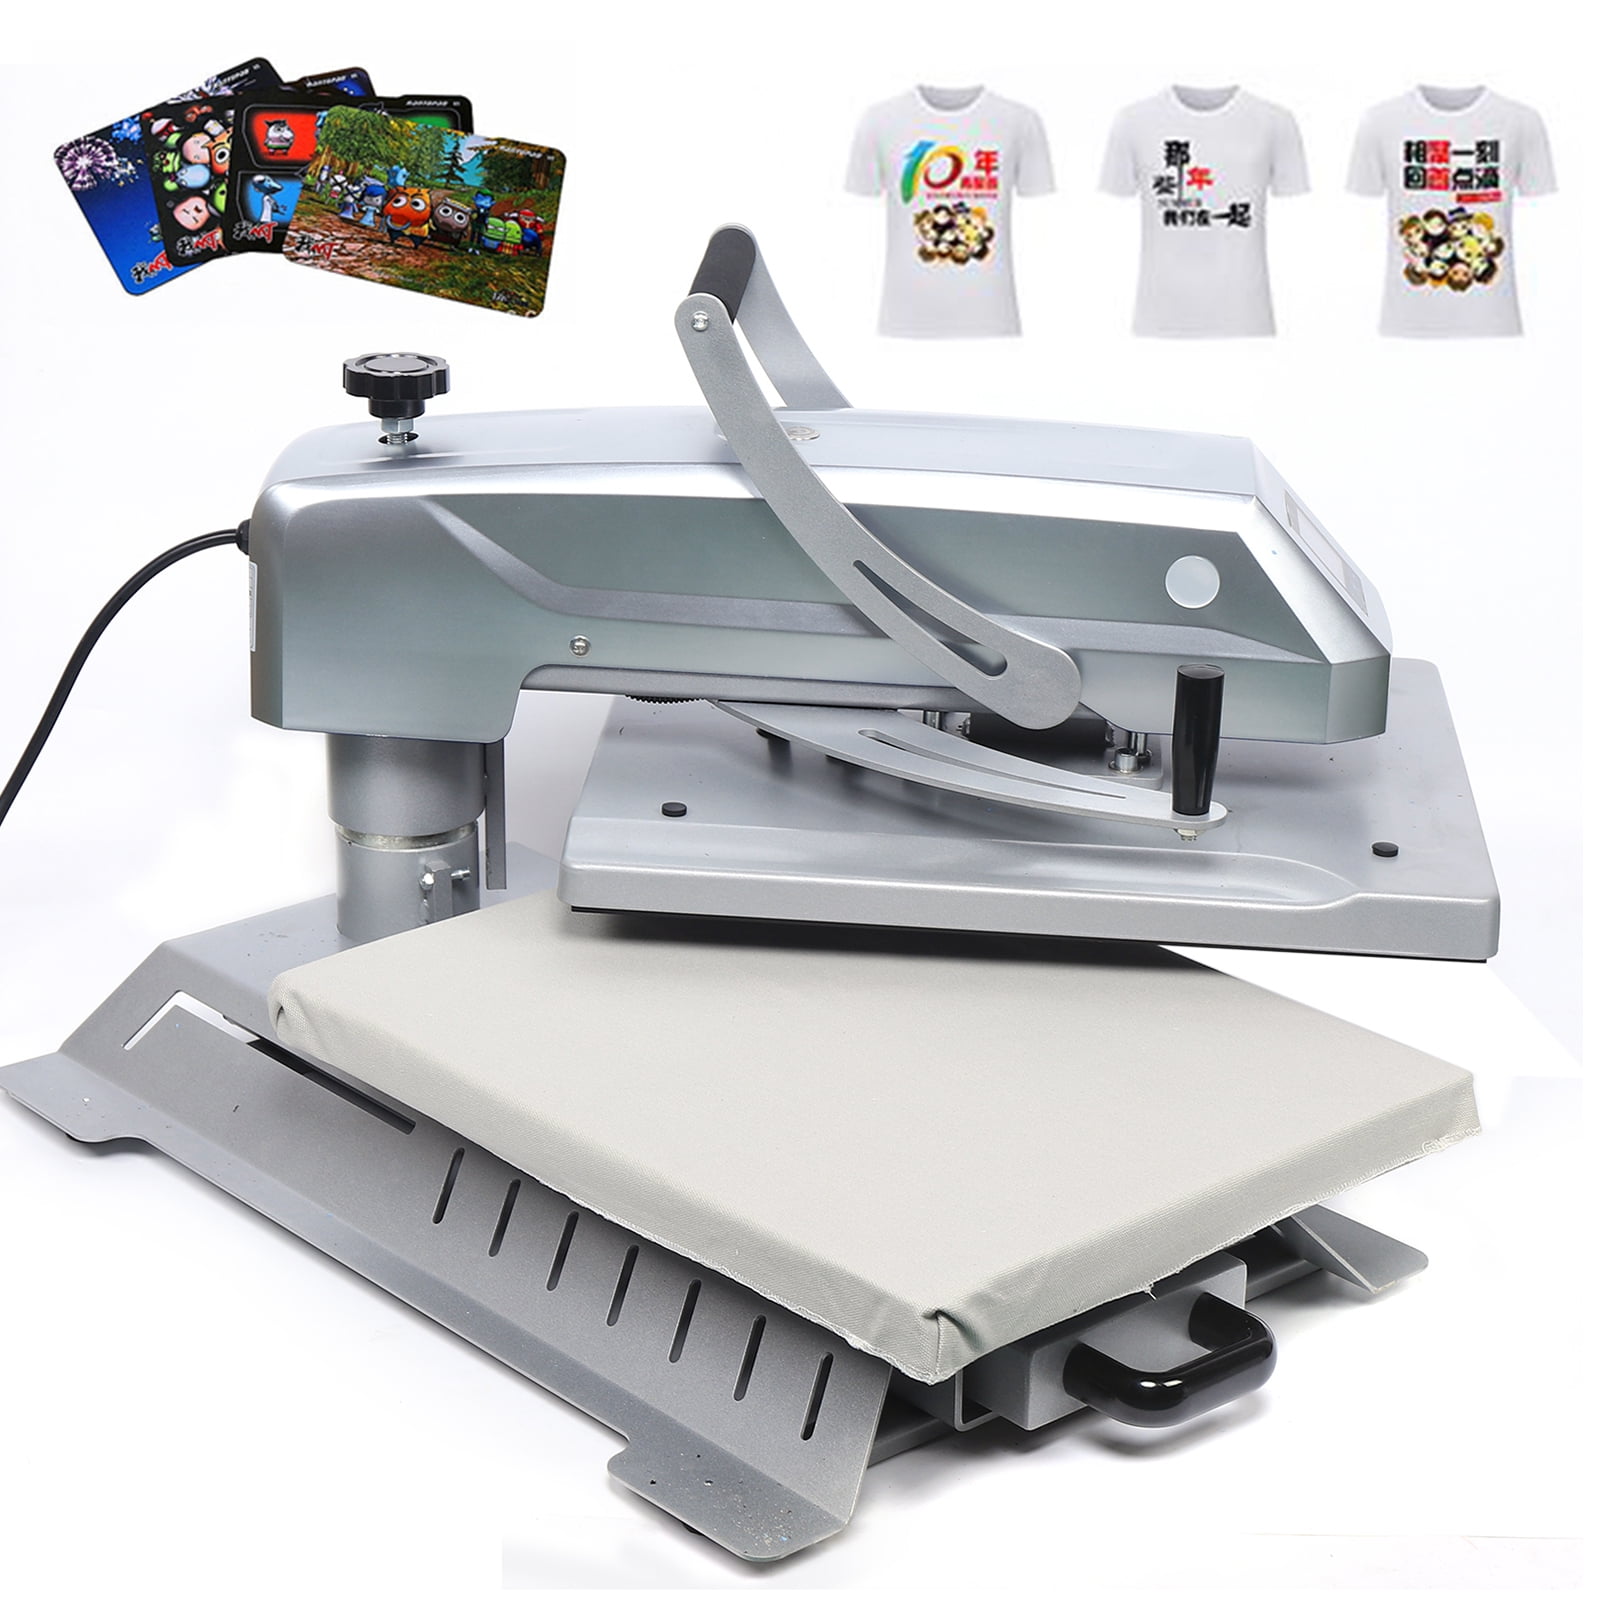 LETRA 16x20 Inch Auto Open Heat Press Machine with Slide Out Base,  Clamshell Heat Press, Digital Clam Heat Press for T Shirts Bags Mouse Pads